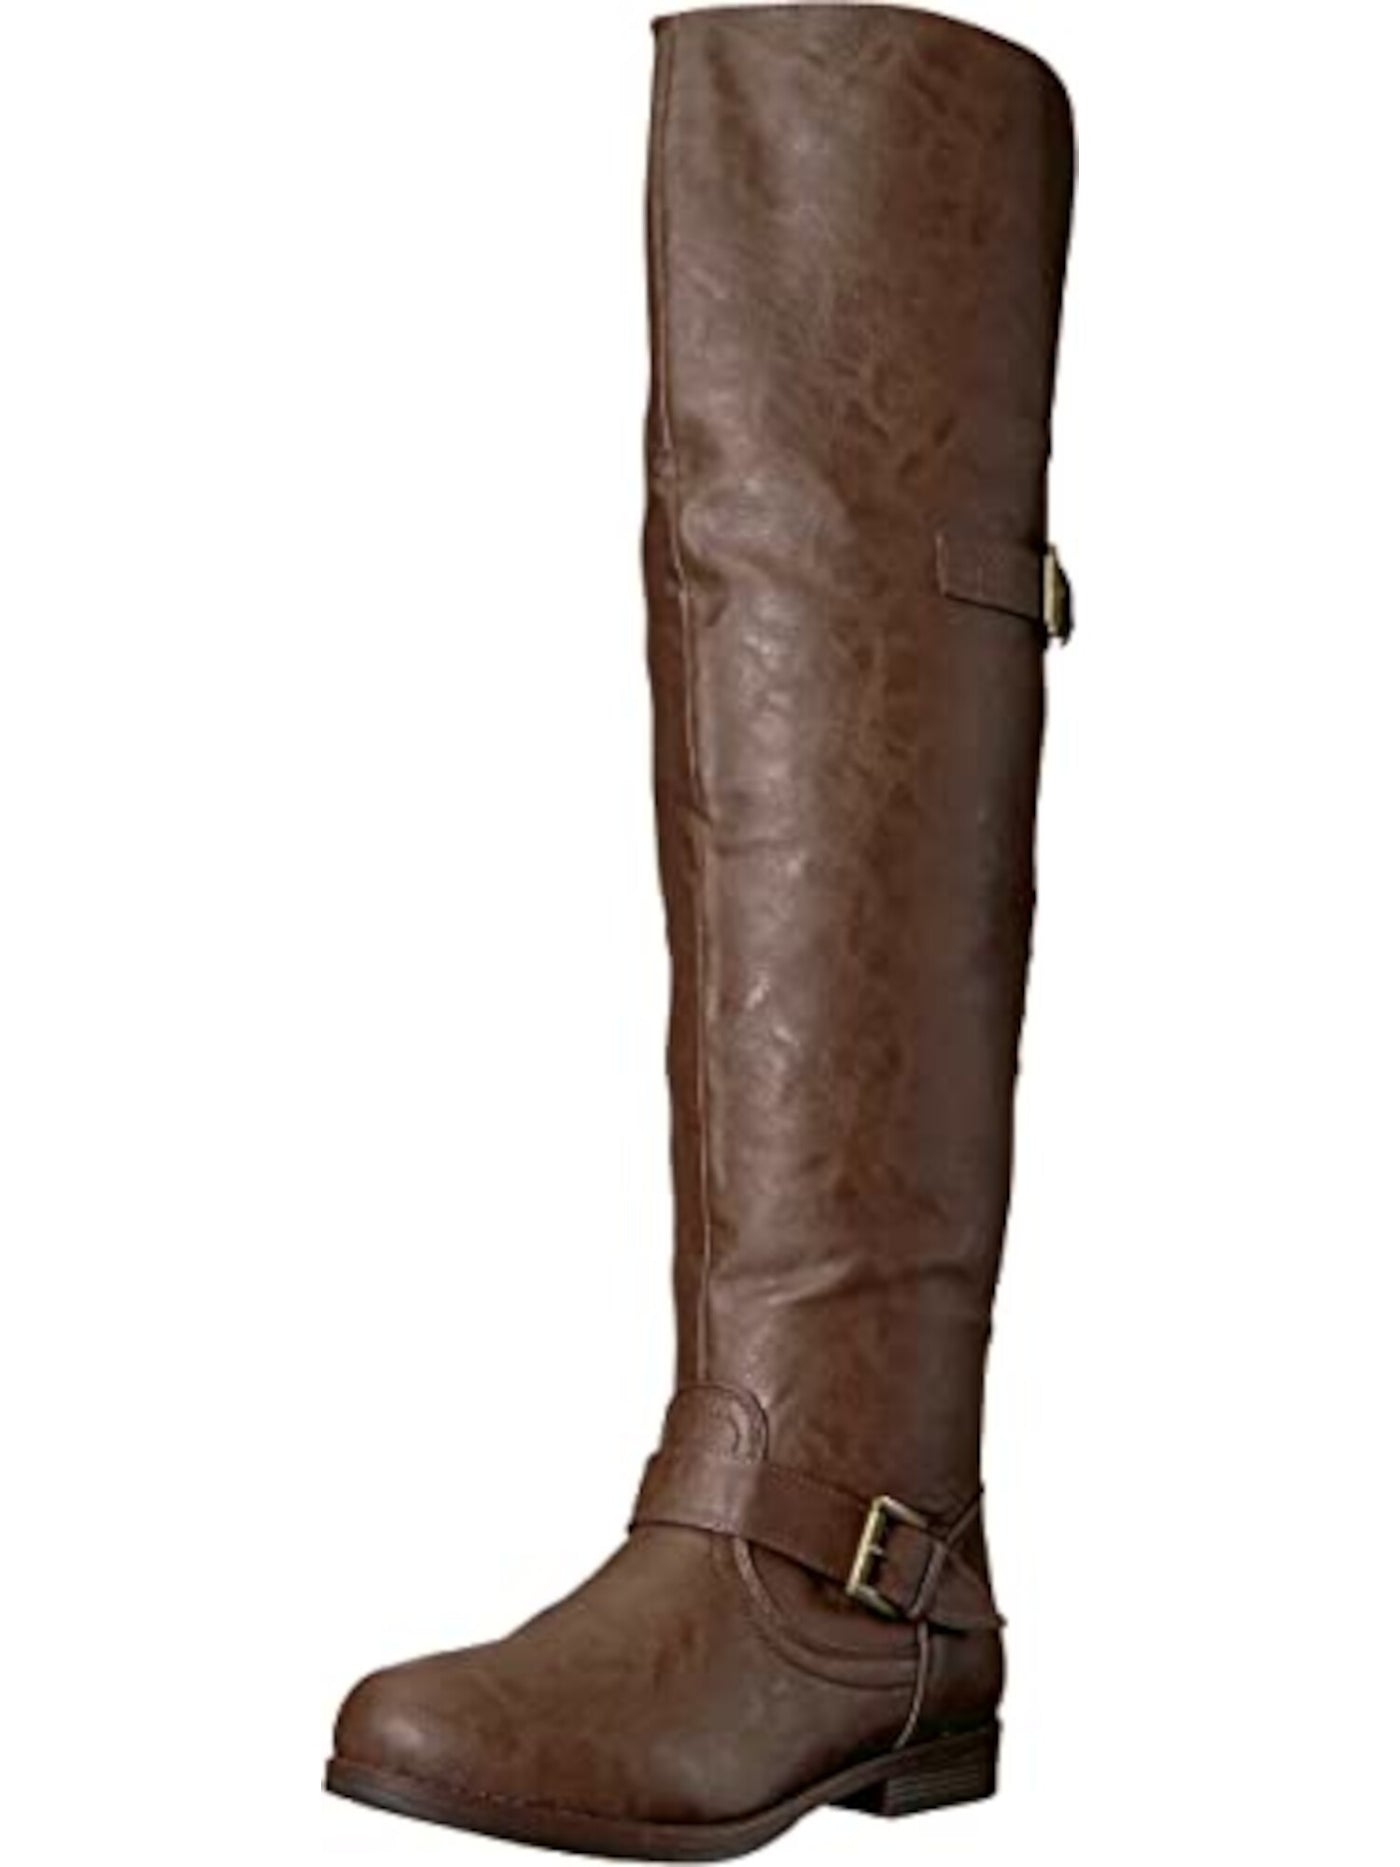 JOURNEE COLLECTION Womens Brown Strappy Studded Buckle Accent Kane Round Toe Zip-Up Boots Shoes 6